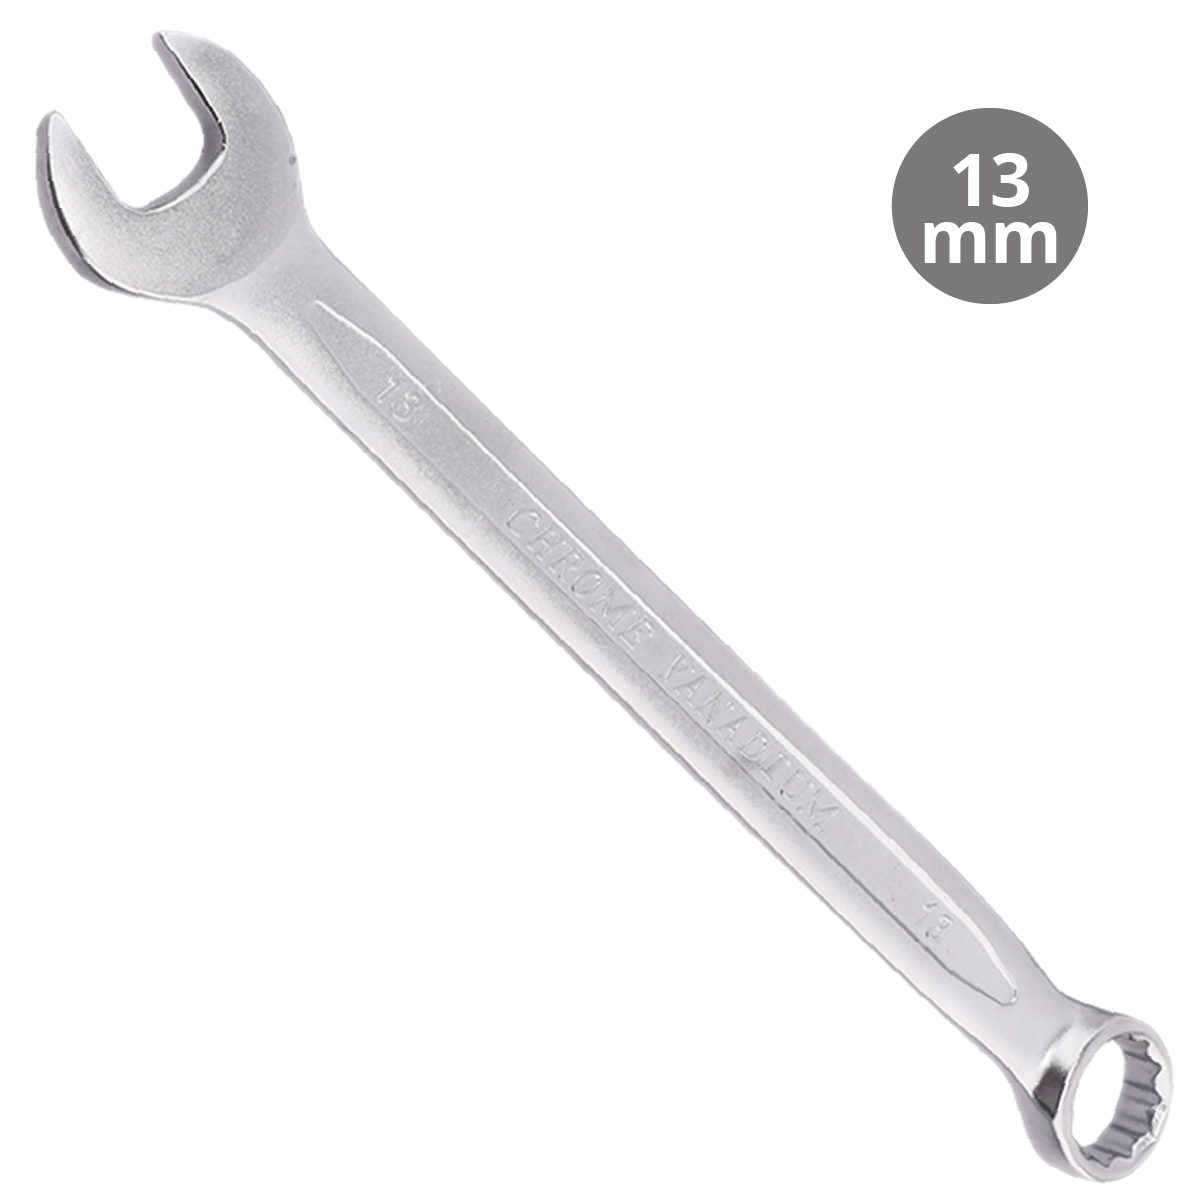 Combination wrench CR-V 13mm